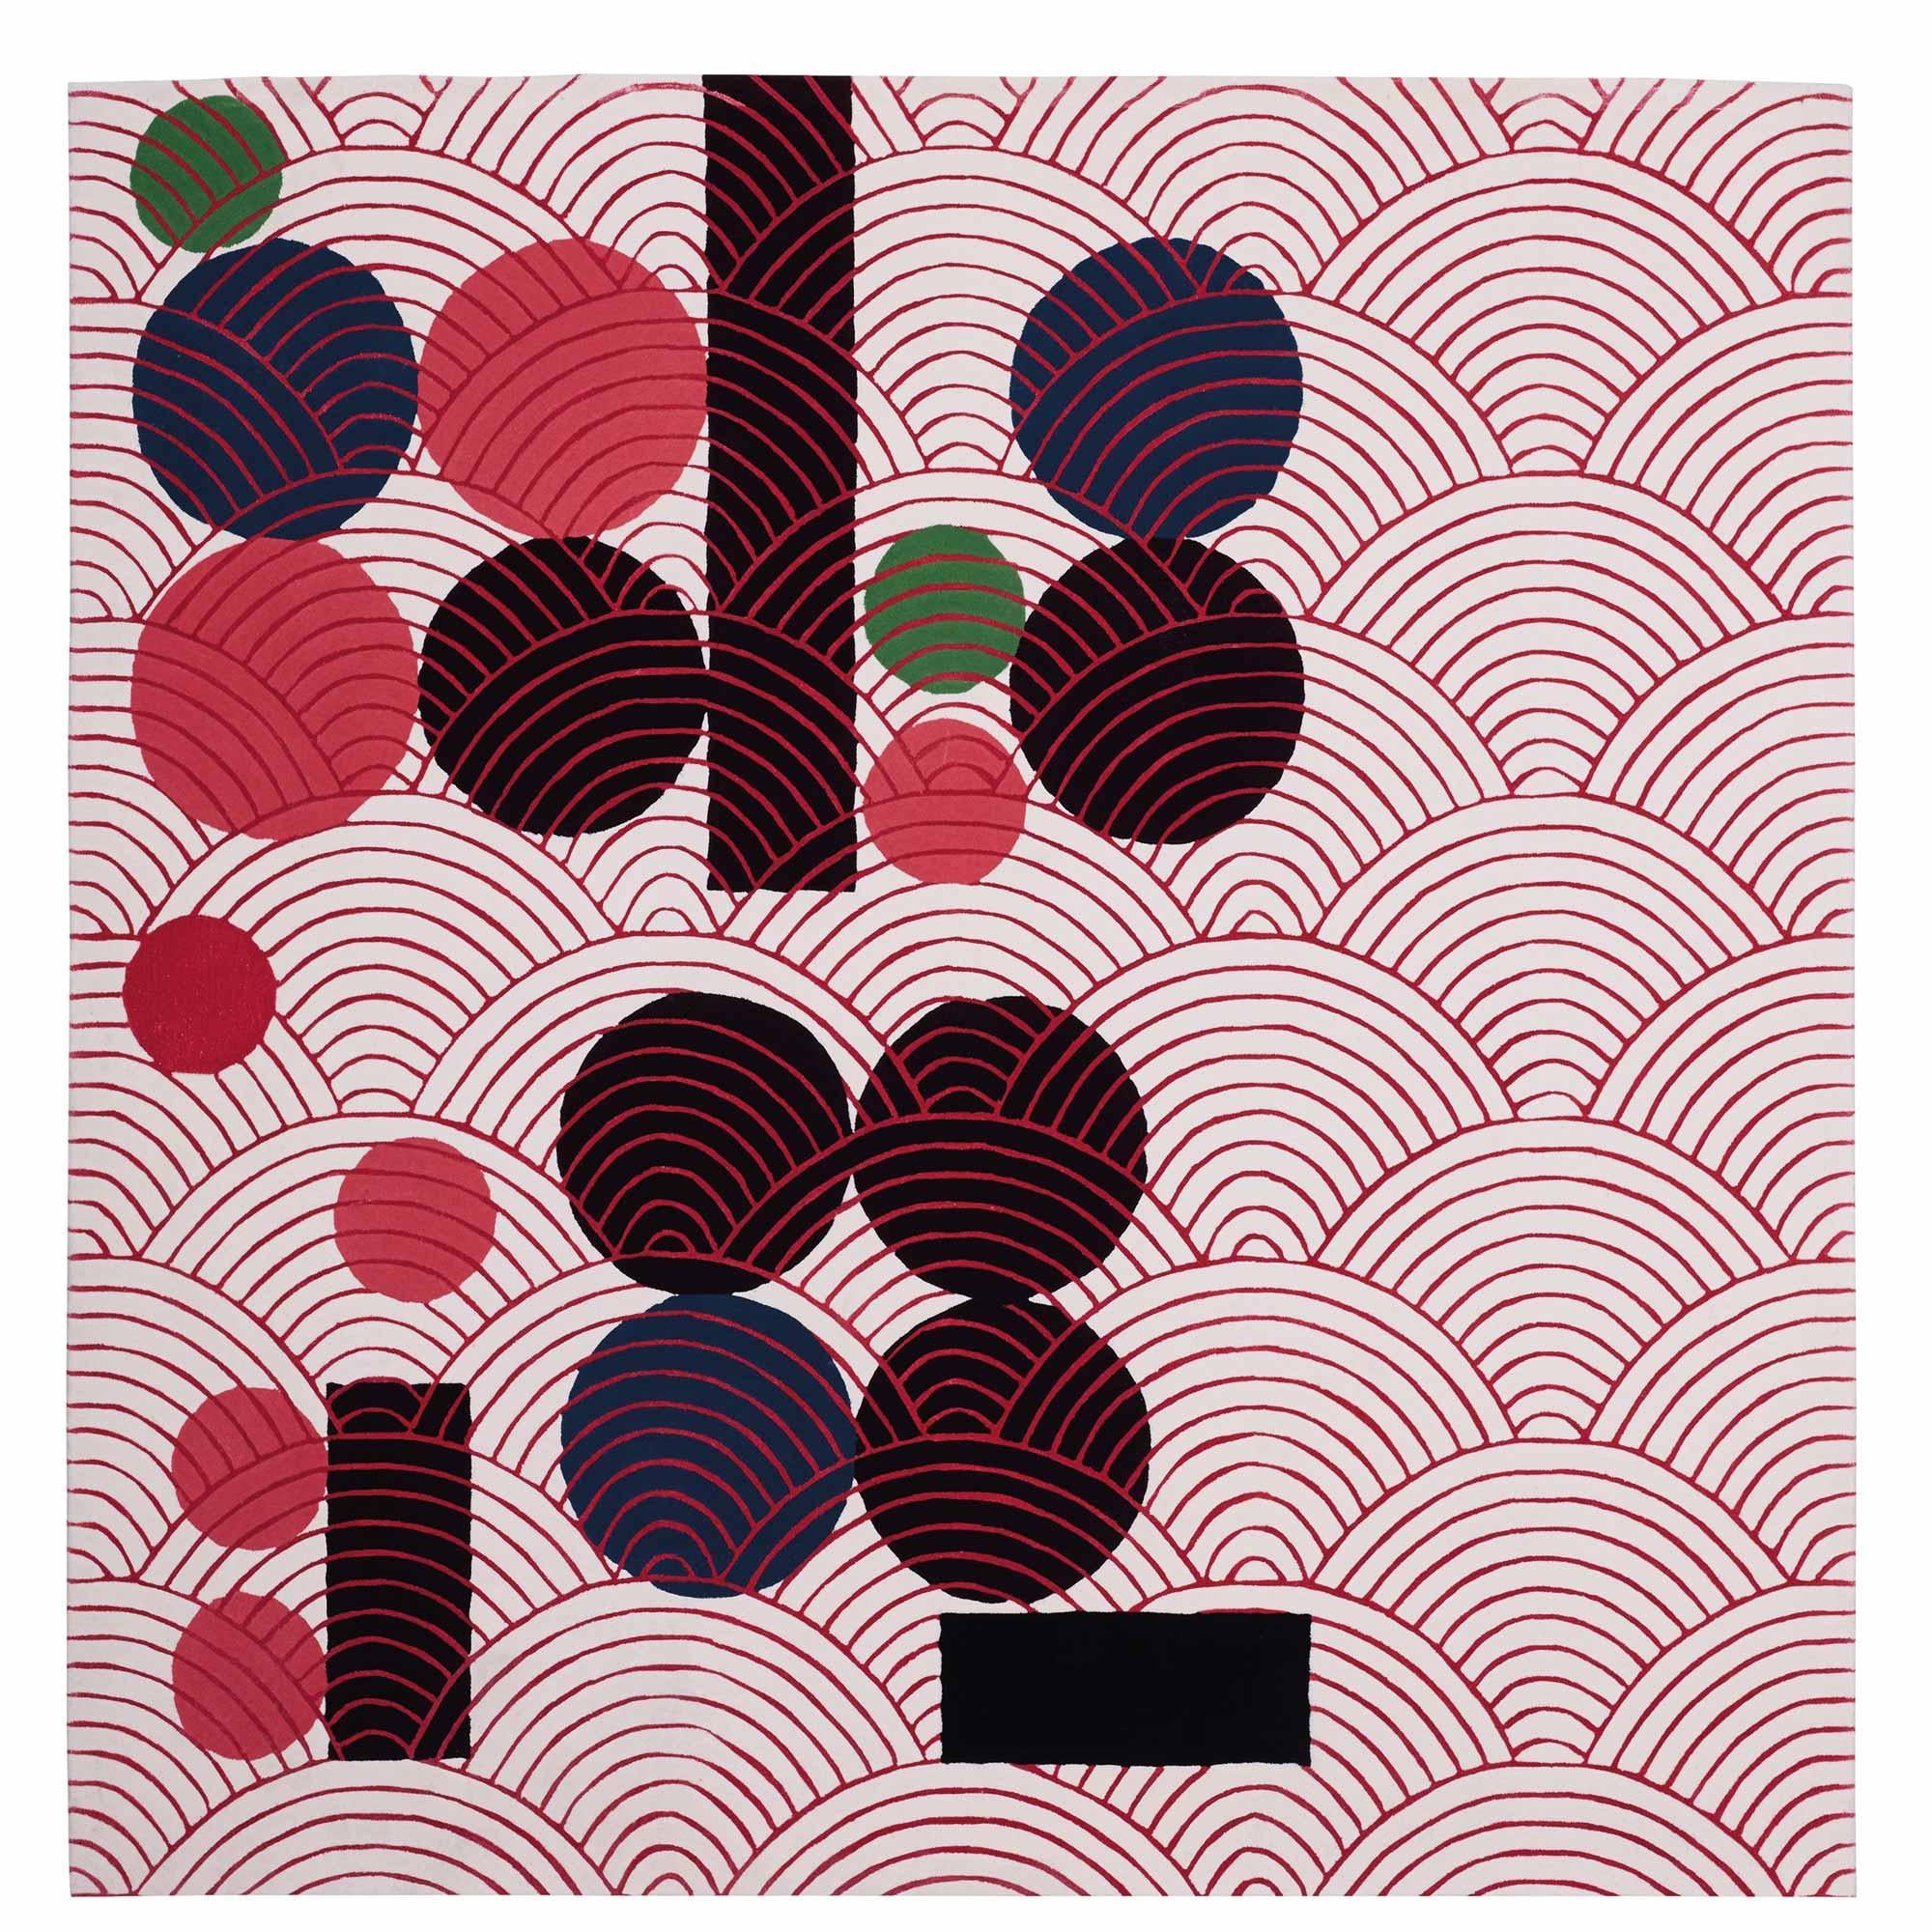 Japanese Abstractions N°3 rug by Thomas Dariel 
Dimensions: D 240 x W 240 cm 
Materials: New Zealand Wool and Viscose. 
Also available in other colors, designs, and dimensions. 


Japanese Abstractions is a collection of nine pieces, all